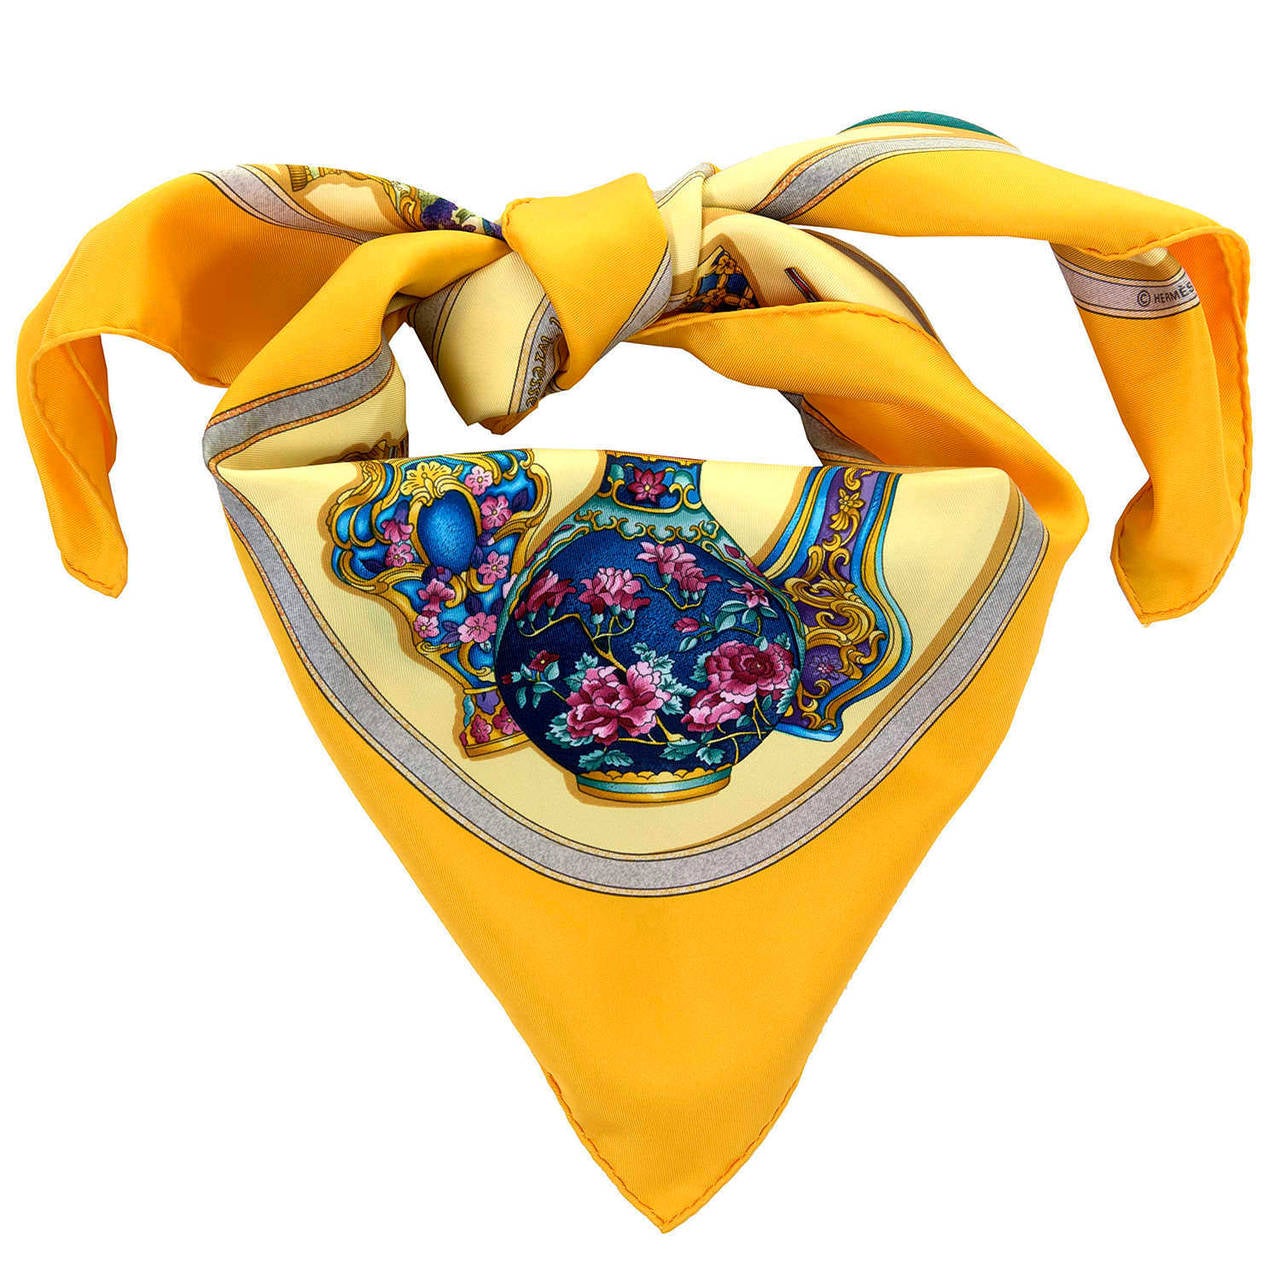 This delightful vintage Hermes Silk Scarf 'Le Flacon' by Catherine Baschet. Made in 1988, this scarf is in excellent condition and depicts Perfume bottles of all different shapes, sizes & colours.

FREE WORLDWIDE DELIVERY IS INCLUDED IN THE PRICE